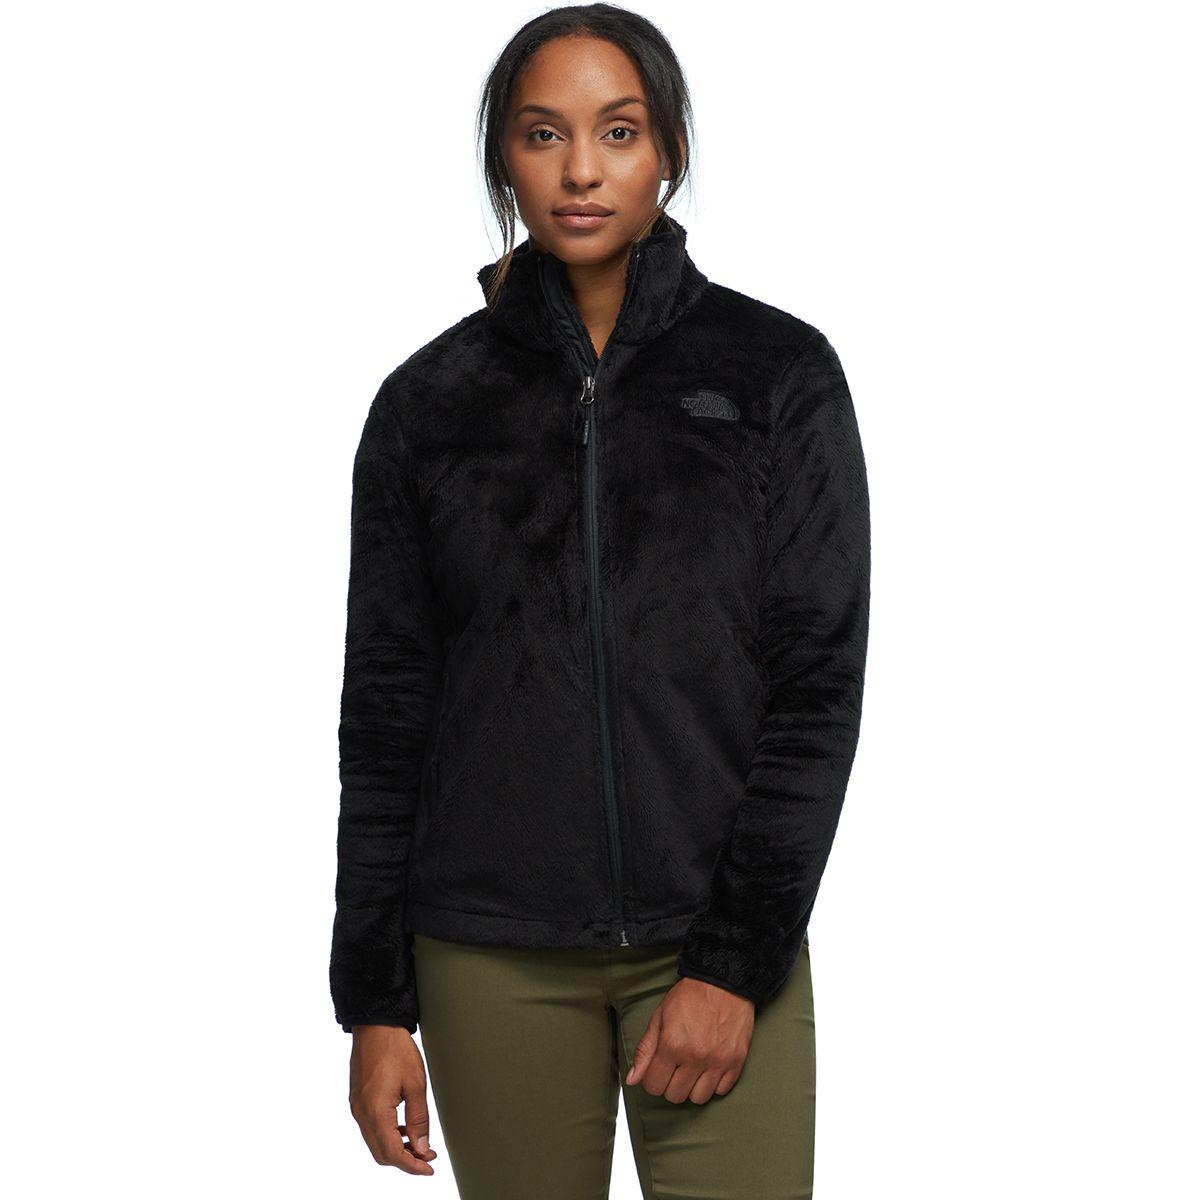 The North Face Osito Fleece Jacket in Black - Lyst